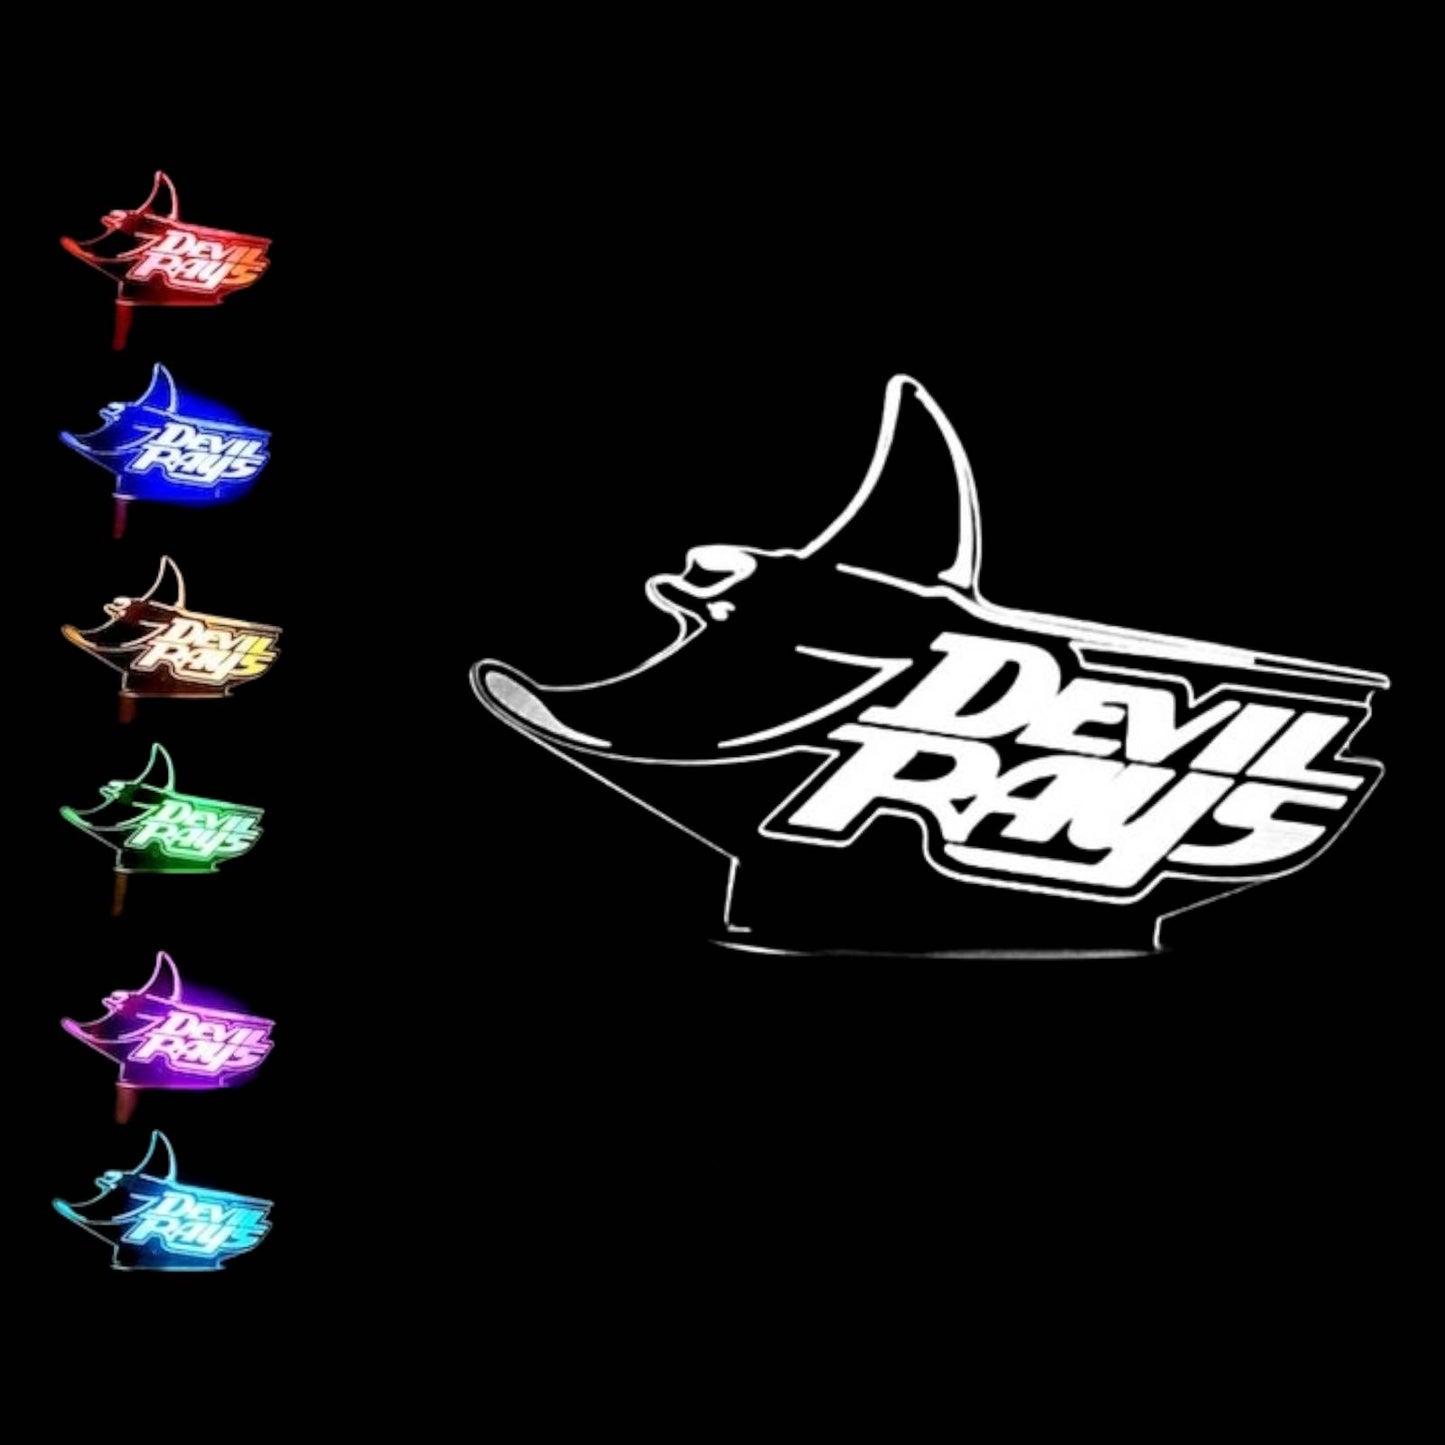 Tampa Bay Devil Rays 3D LED Night-Light 7 Color Changing Lamp w/ Touch Switch